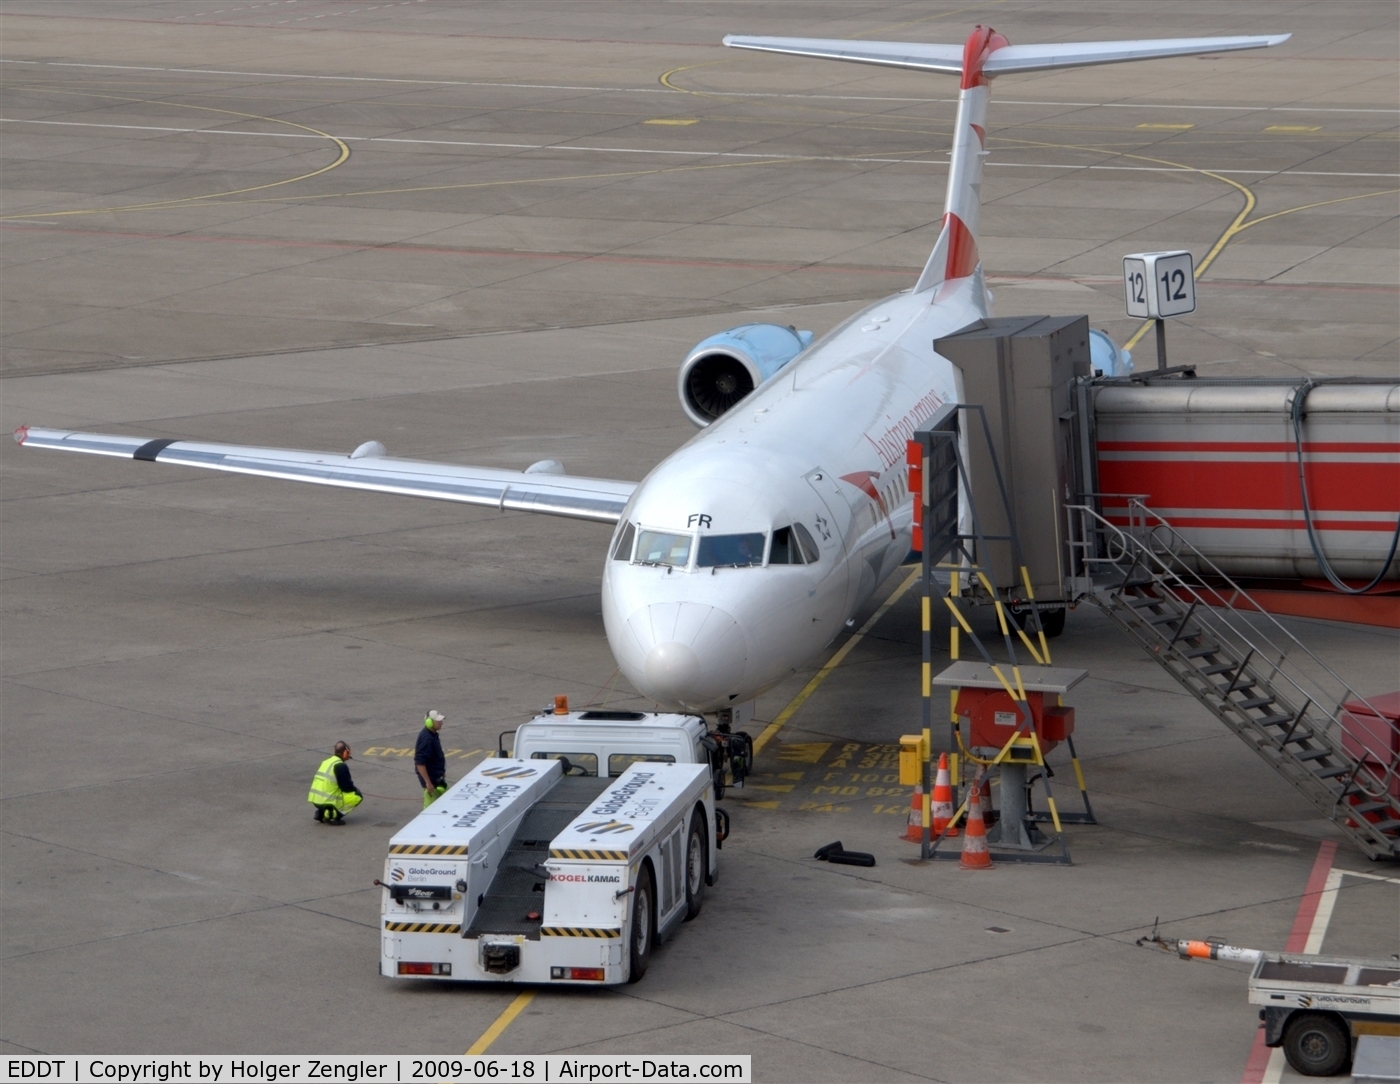 Tegel International Airport (closing in 2011), Berlin Germany (EDDT) - Pusher crew seems to have some obstacles ....